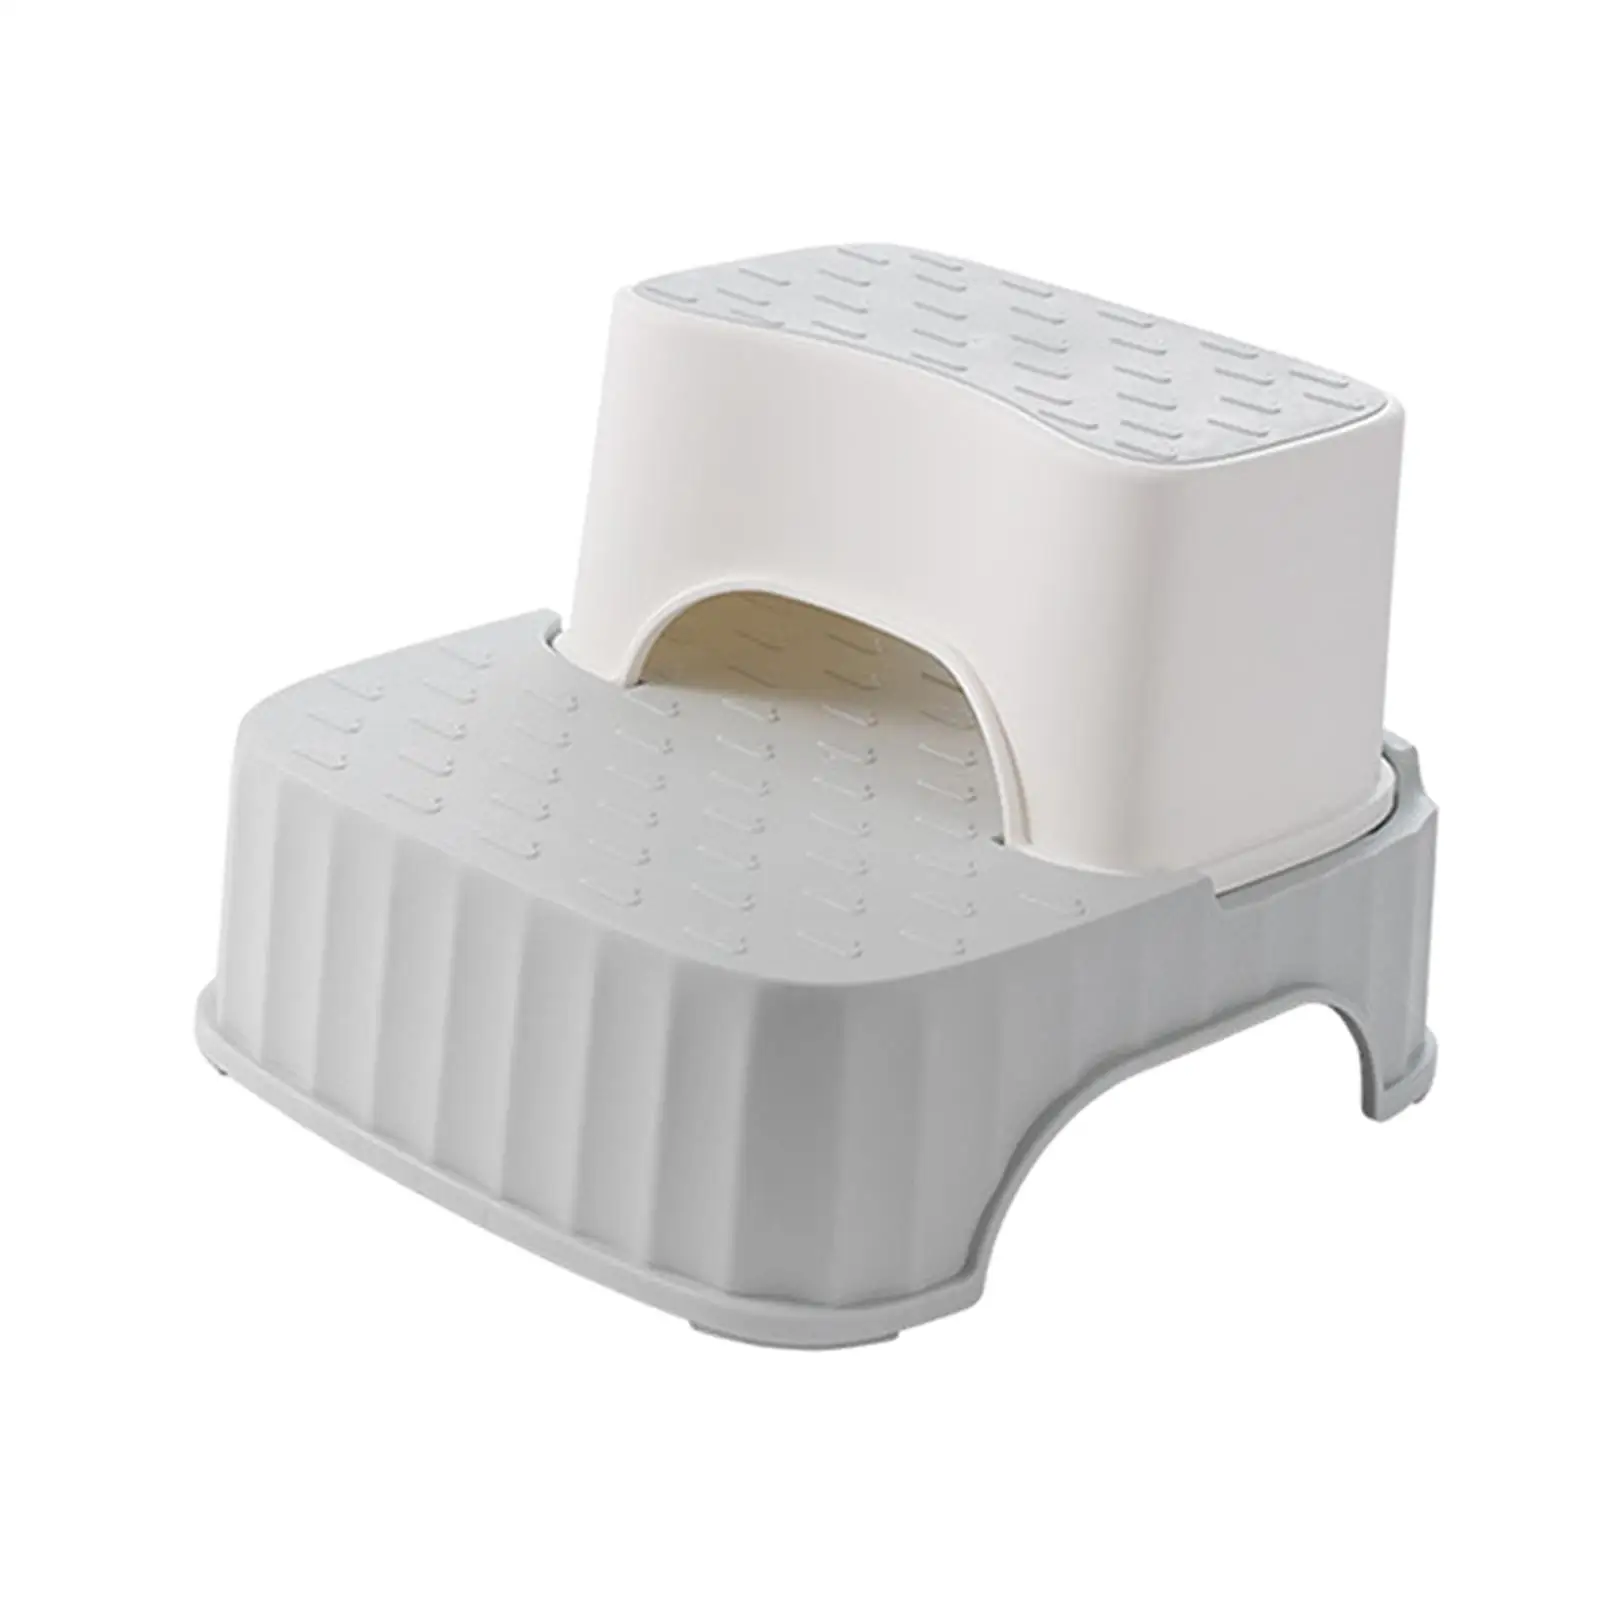 Toilet Step Stool Toilet Step Stool Non Slip for Study Home Gifts